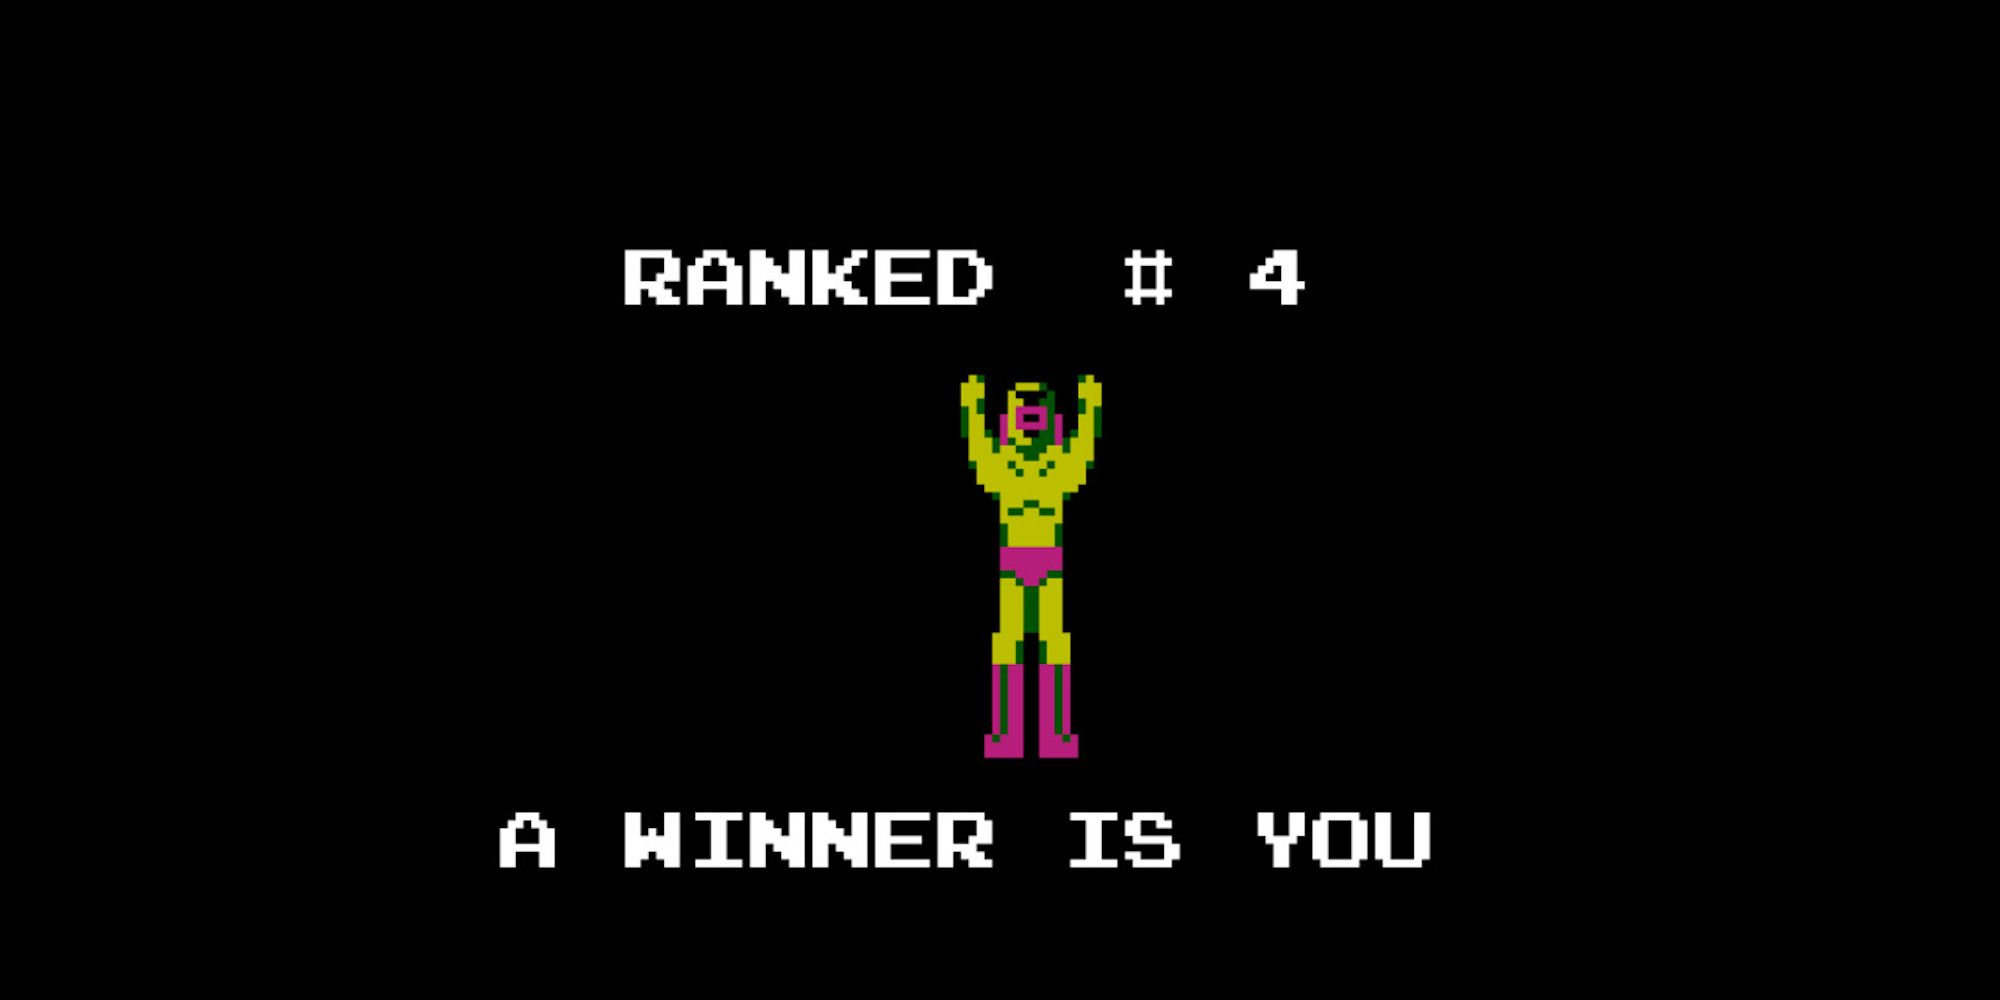 The ending screen to Pro Wrestling